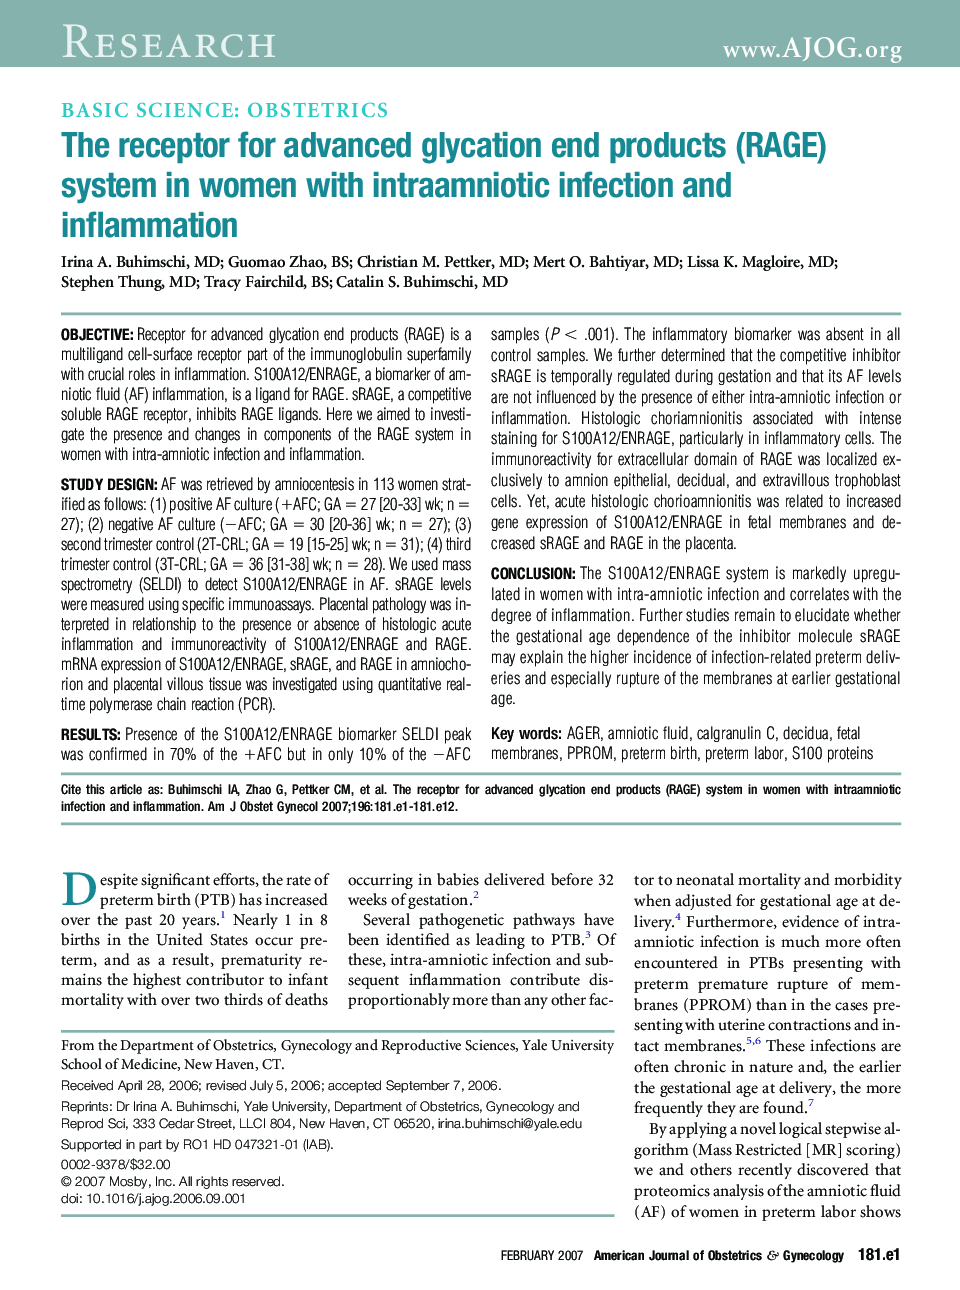 The receptor for advanced glycation end products (RAGE) system in women with intraamniotic infection and inflammation